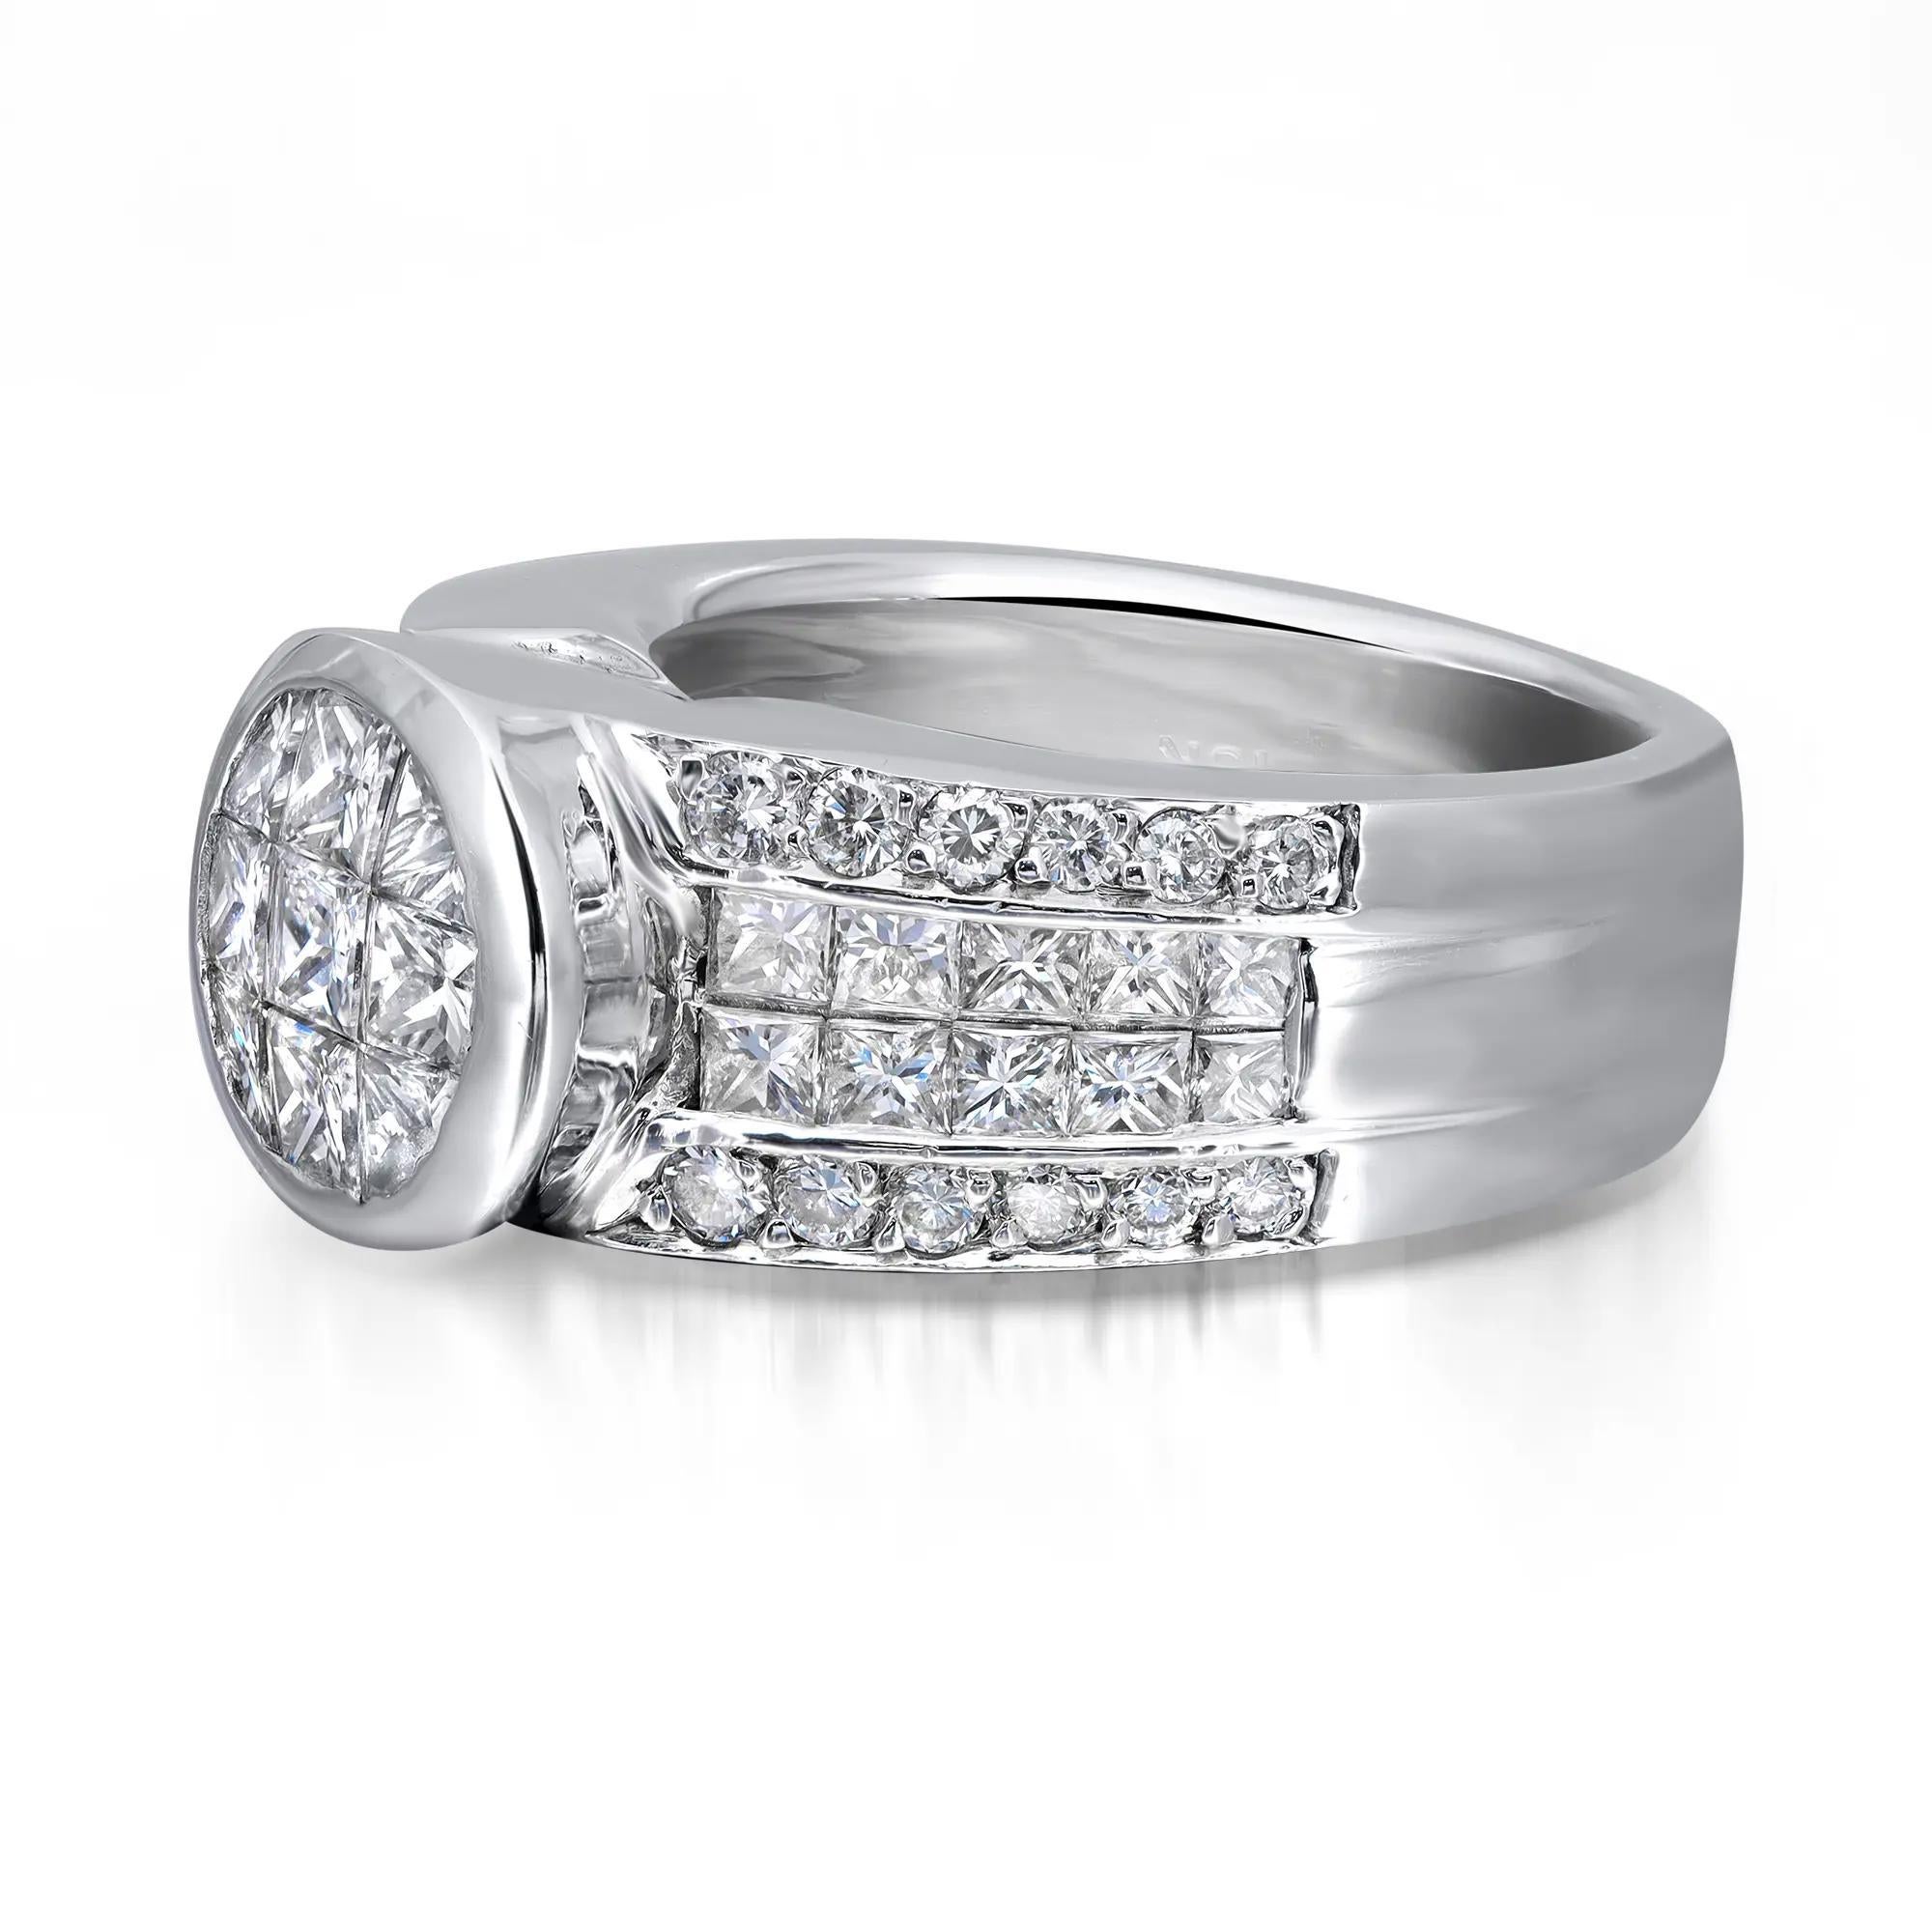 Modern 2.00Cttw Princess And Round Cut Diamond Band Ring 18K White Gold Size 6.75 For Sale